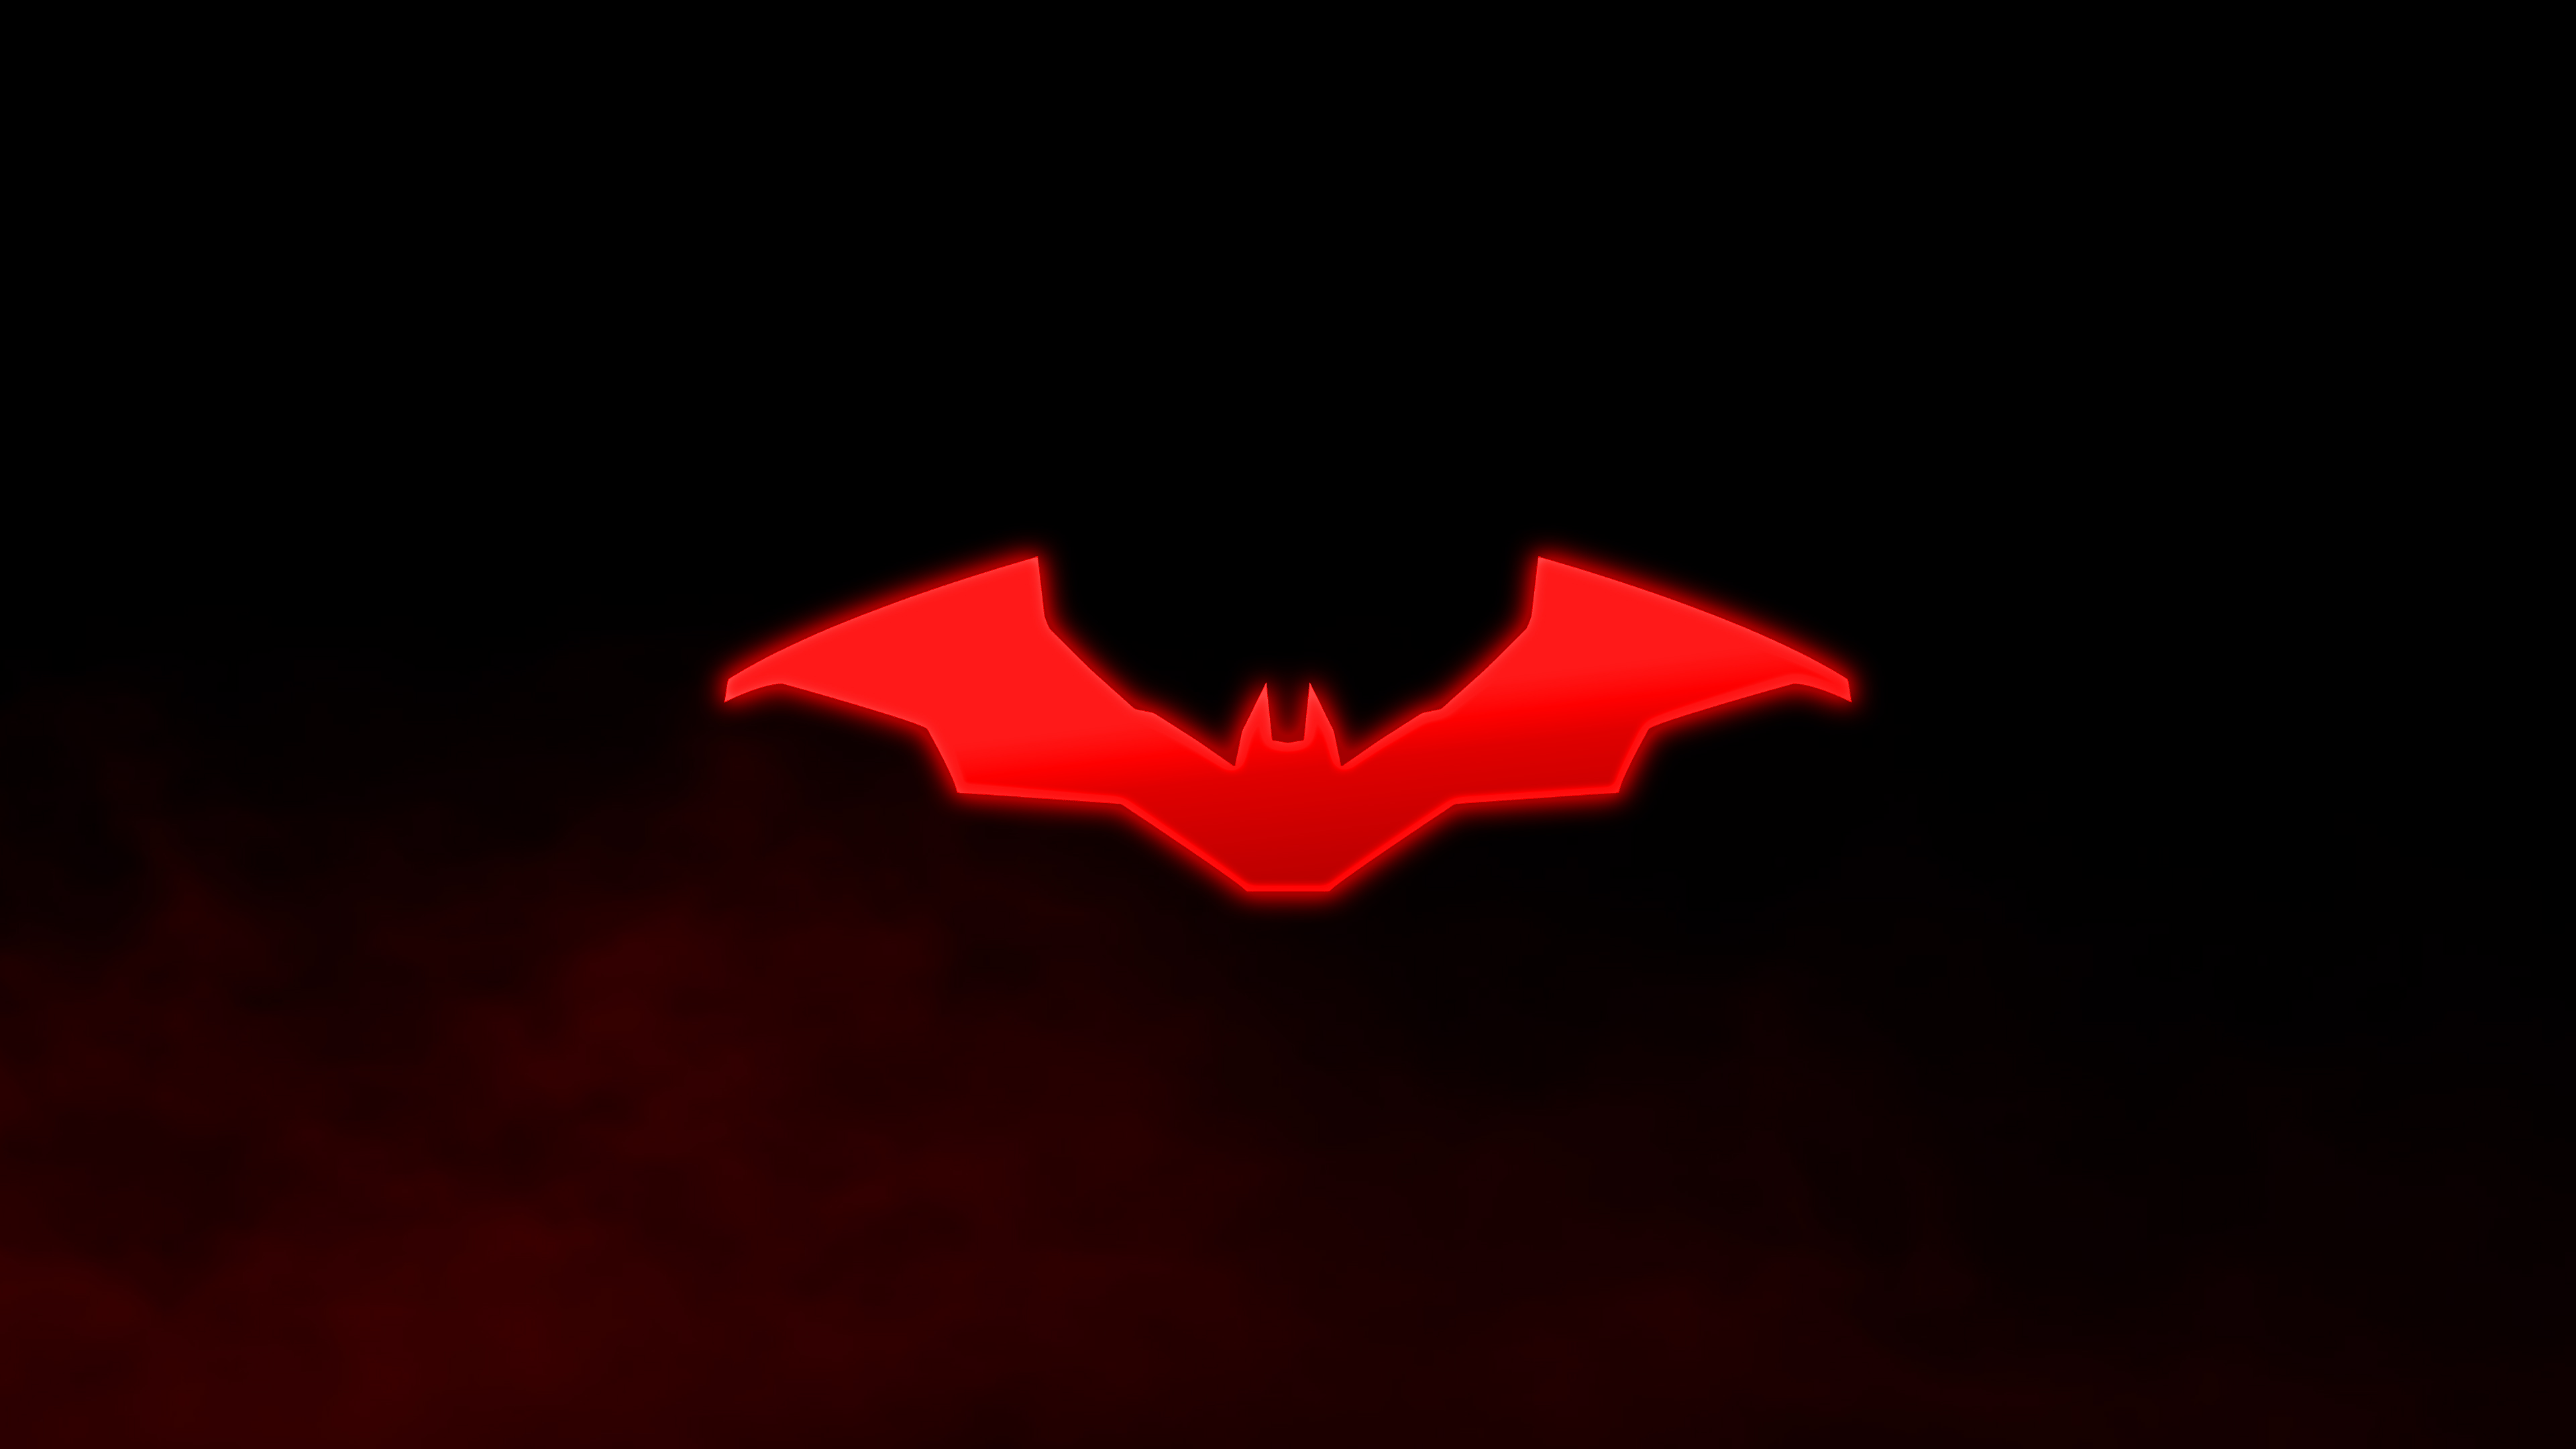 Batman 4K wallpaper for your desktop or mobile screen free and easy to download